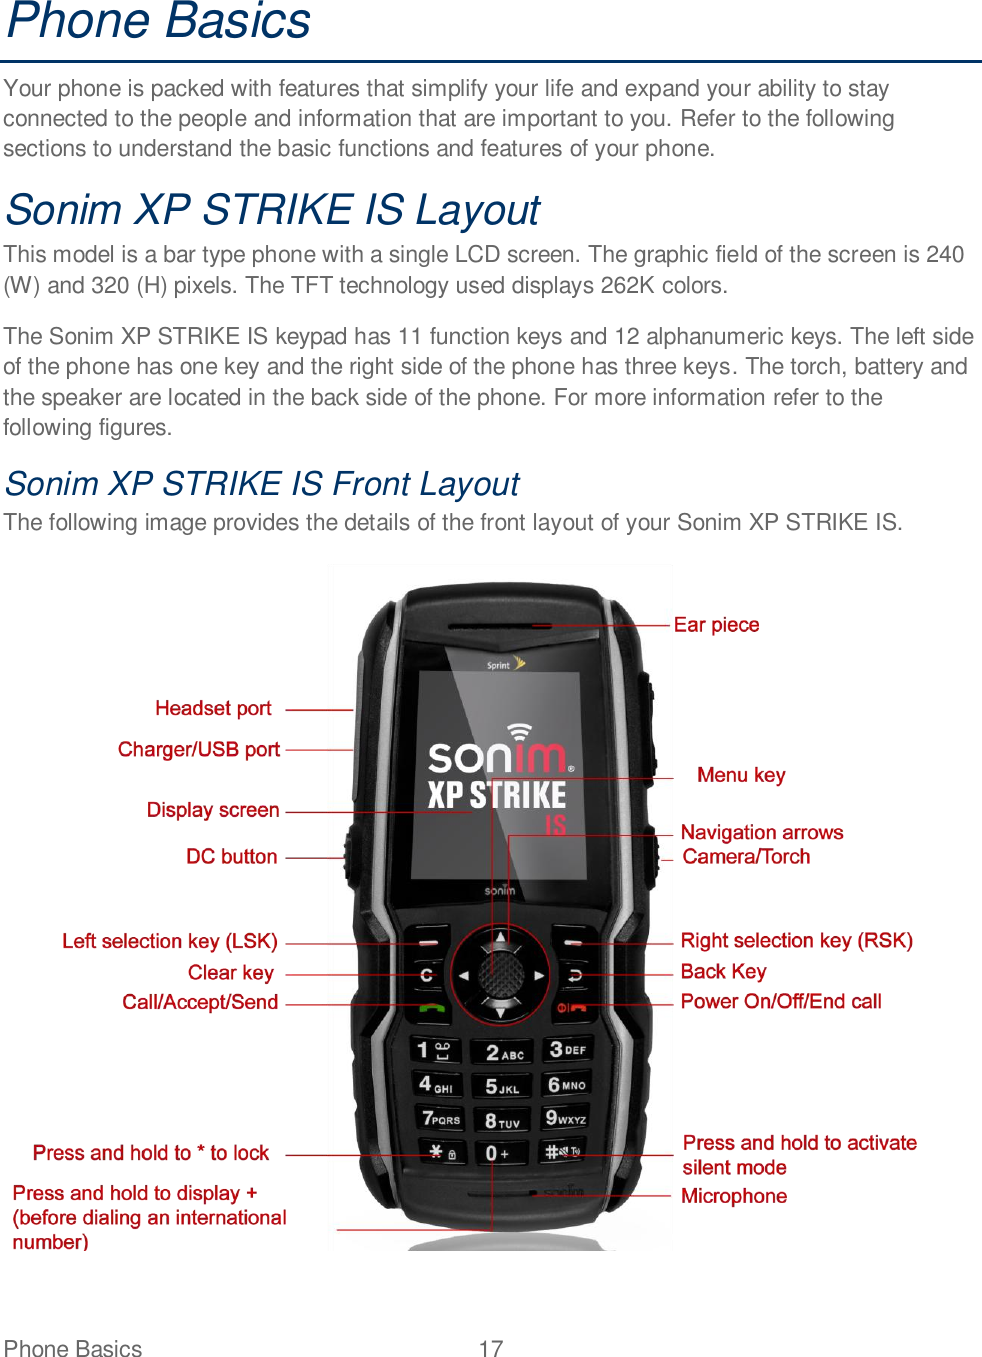 Phone Basics  17   Phone Basics Your phone is packed with features that simplify your life and expand your ability to stay connected to the people and information that are important to you. Refer to the following sections to understand the basic functions and features of your phone. Sonim XP STRIKE IS Layout This model is a bar type phone with a single LCD screen. The graphic field of the screen is 240 (W) and 320 (H) pixels. The TFT technology used displays 262K colors. The Sonim XP STRIKE IS keypad has 11 function keys and 12 alphanumeric keys. The left side of the phone has one key and the right side of the phone has three keys. The torch, battery and the speaker are located in the back side of the phone. For more information refer to the following figures. Sonim XP STRIKE IS Front Layout The following image provides the details of the front layout of your Sonim XP STRIKE IS.  